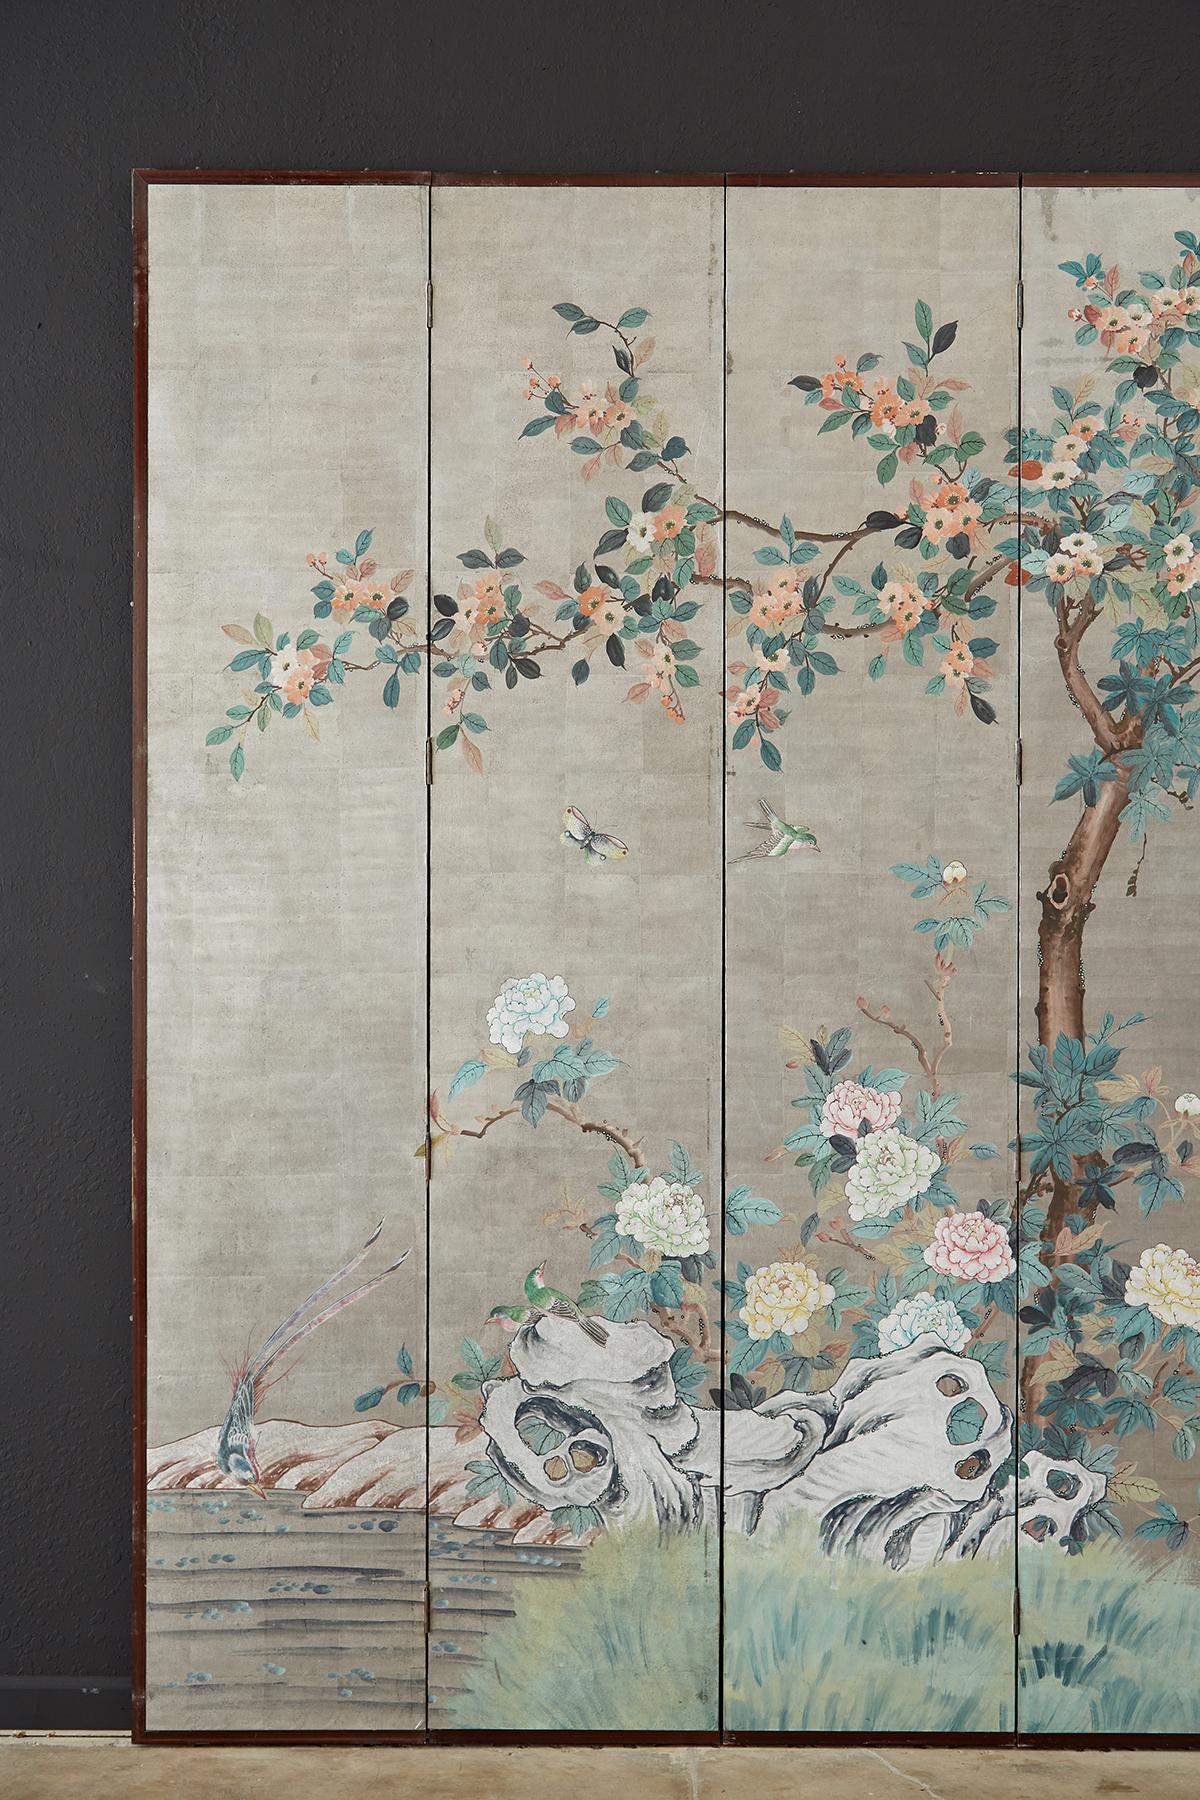 Monumental chinoiserie style eight panel screen made of wood panels covered with delicate silver leaf and hand-painted. Signed and sealed by artist Tian Jing on top right corner. Depicts a spring scene with flora and fauna dated with a cyclical year